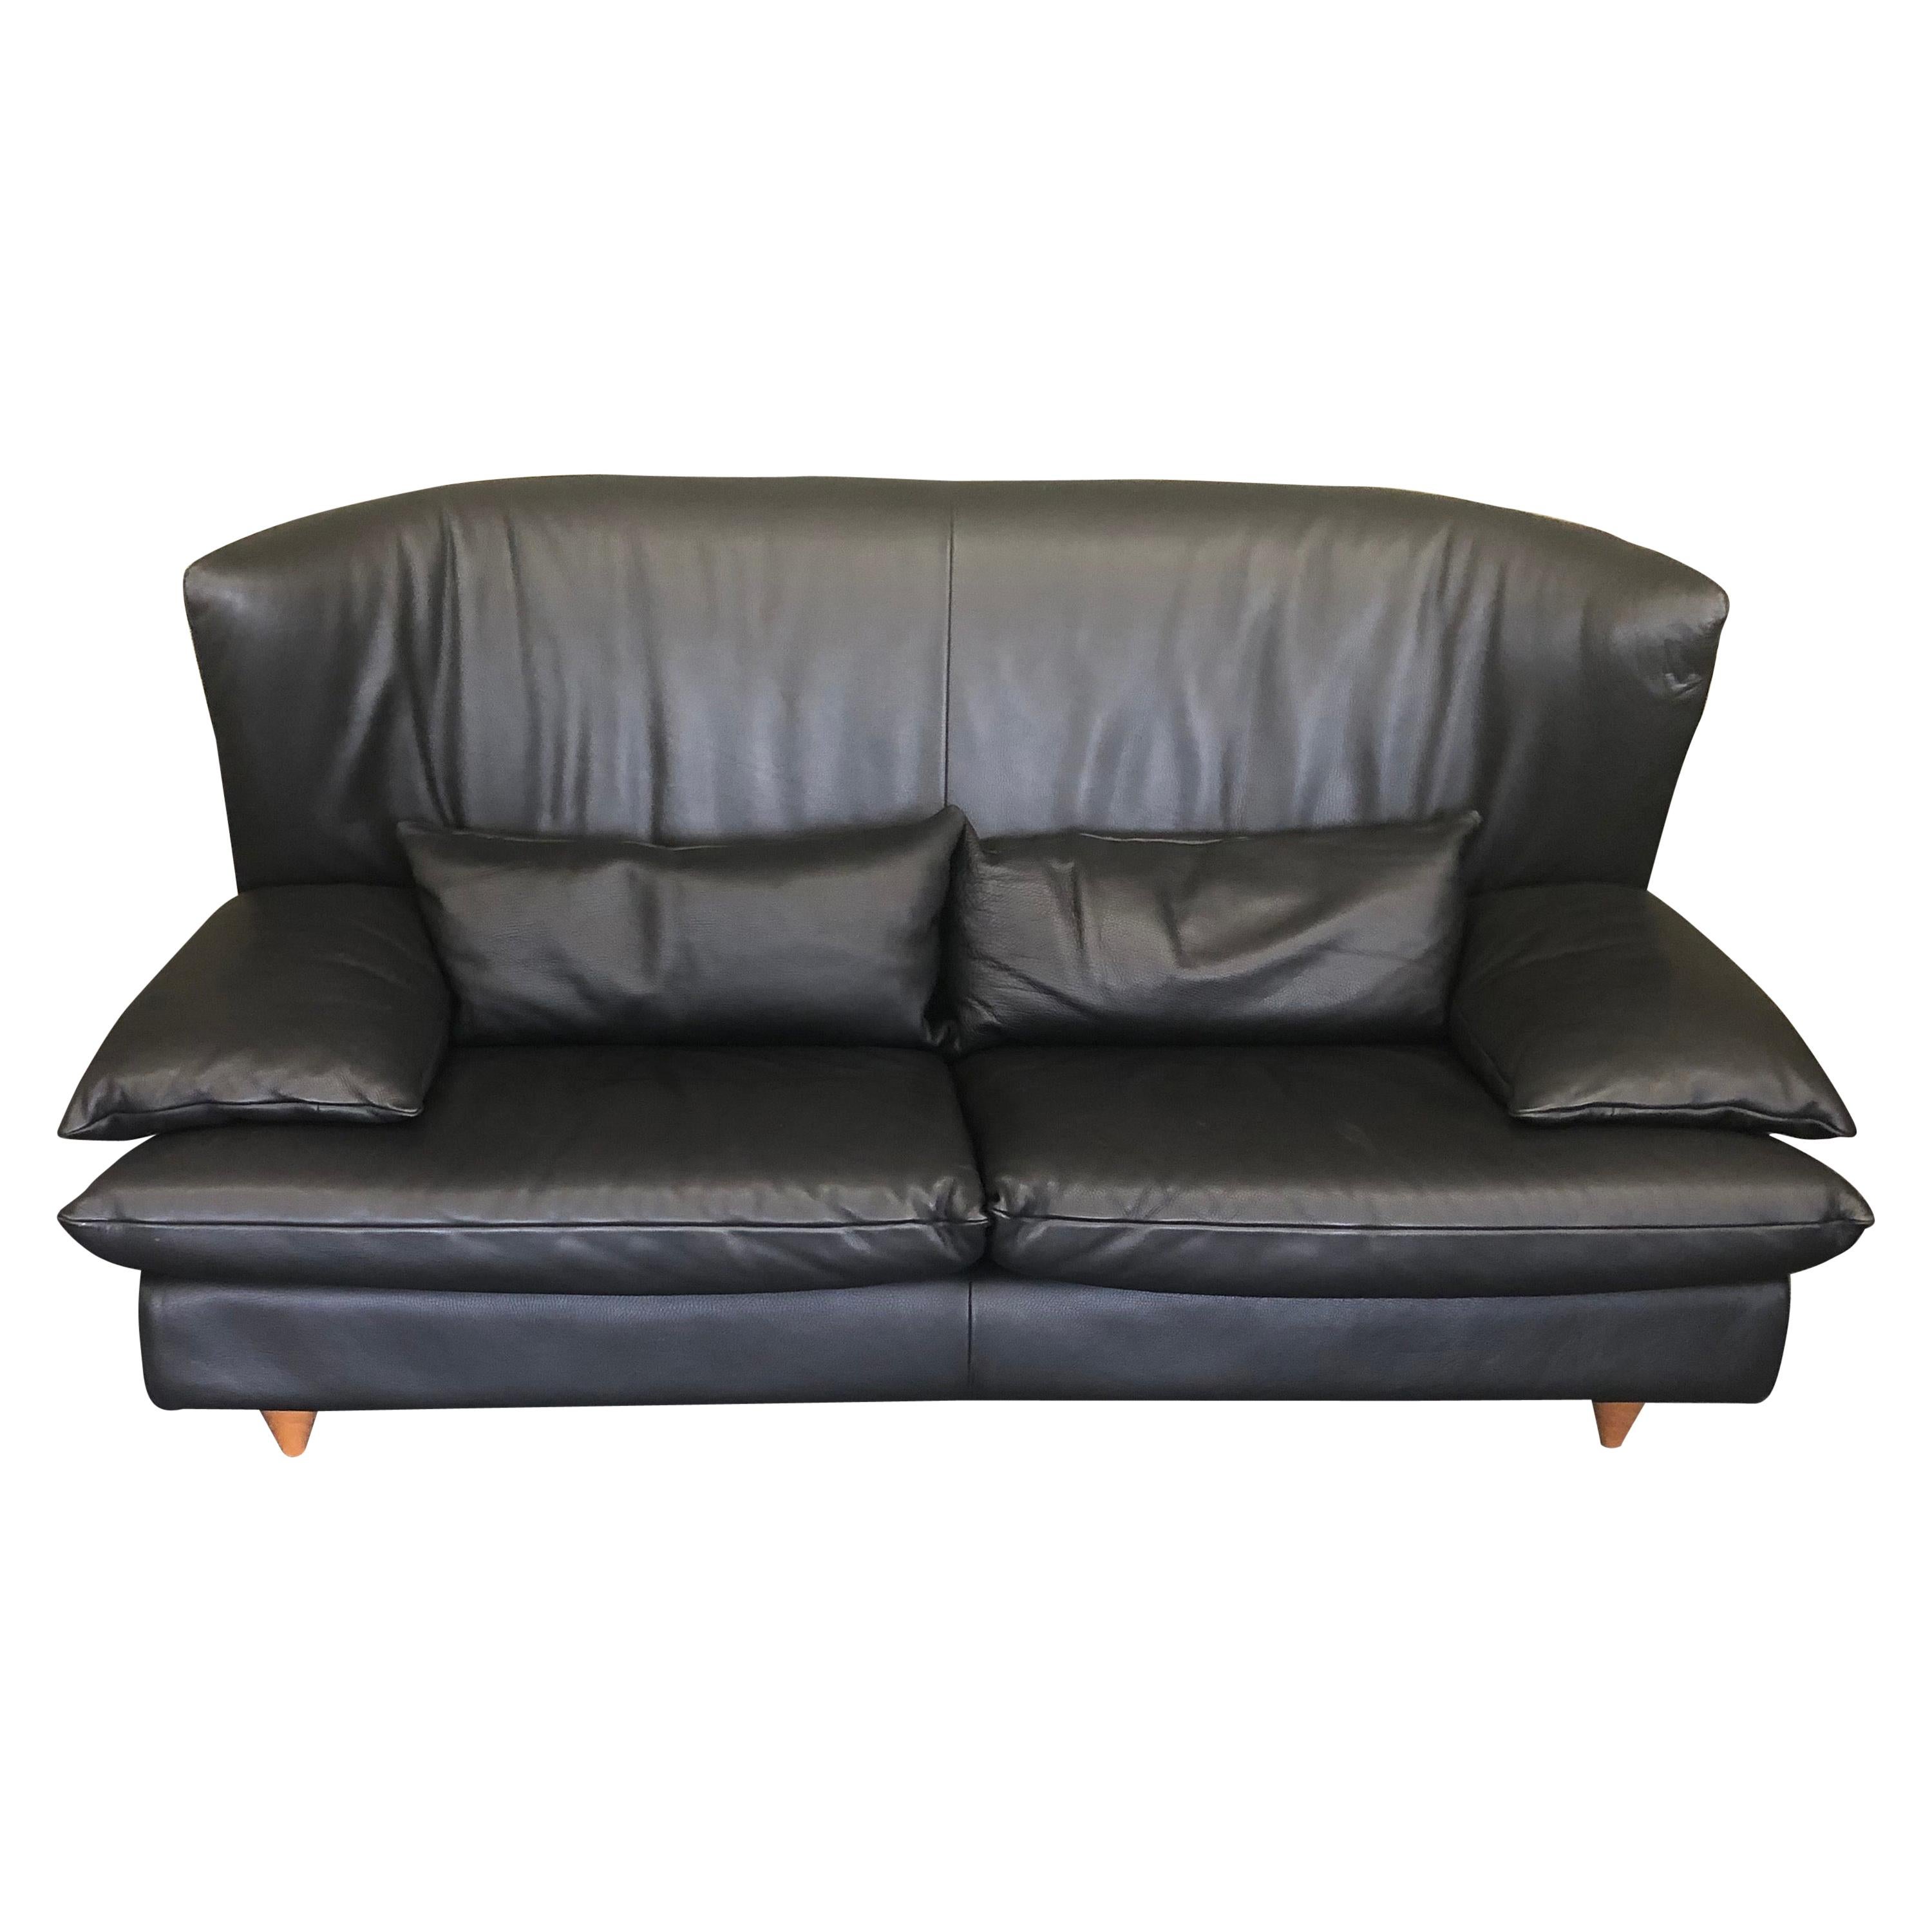 Italian Black Leather Postmodern Loveseat by i4 Mariani for the Pace Collection